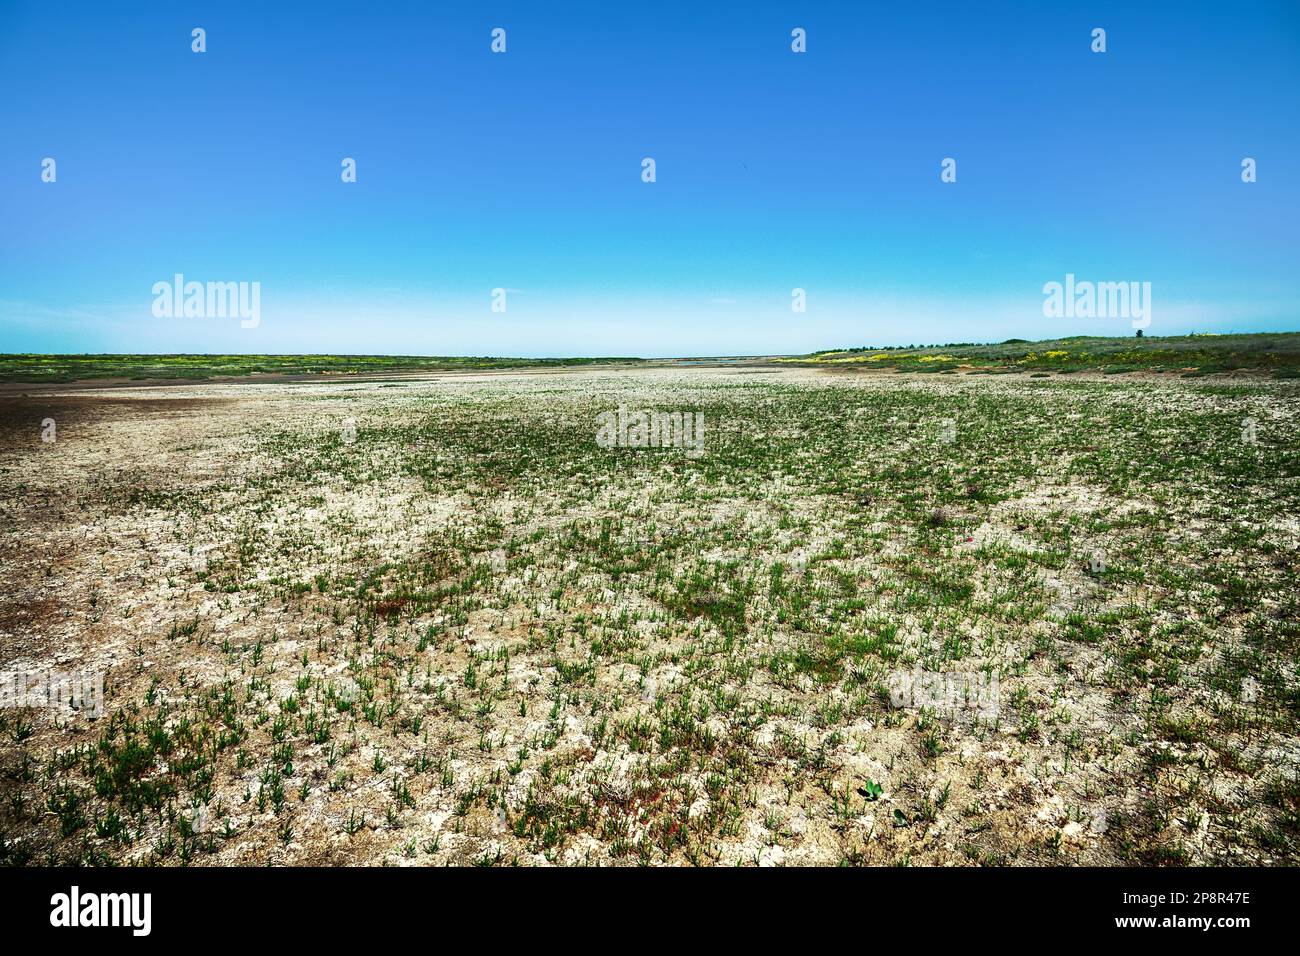 The salt marsh is quickly colonized by Saltwort (Salicornia europaea) after the spring flood and drought. Saltwort as the most salt-tolerant plant Stock Photo